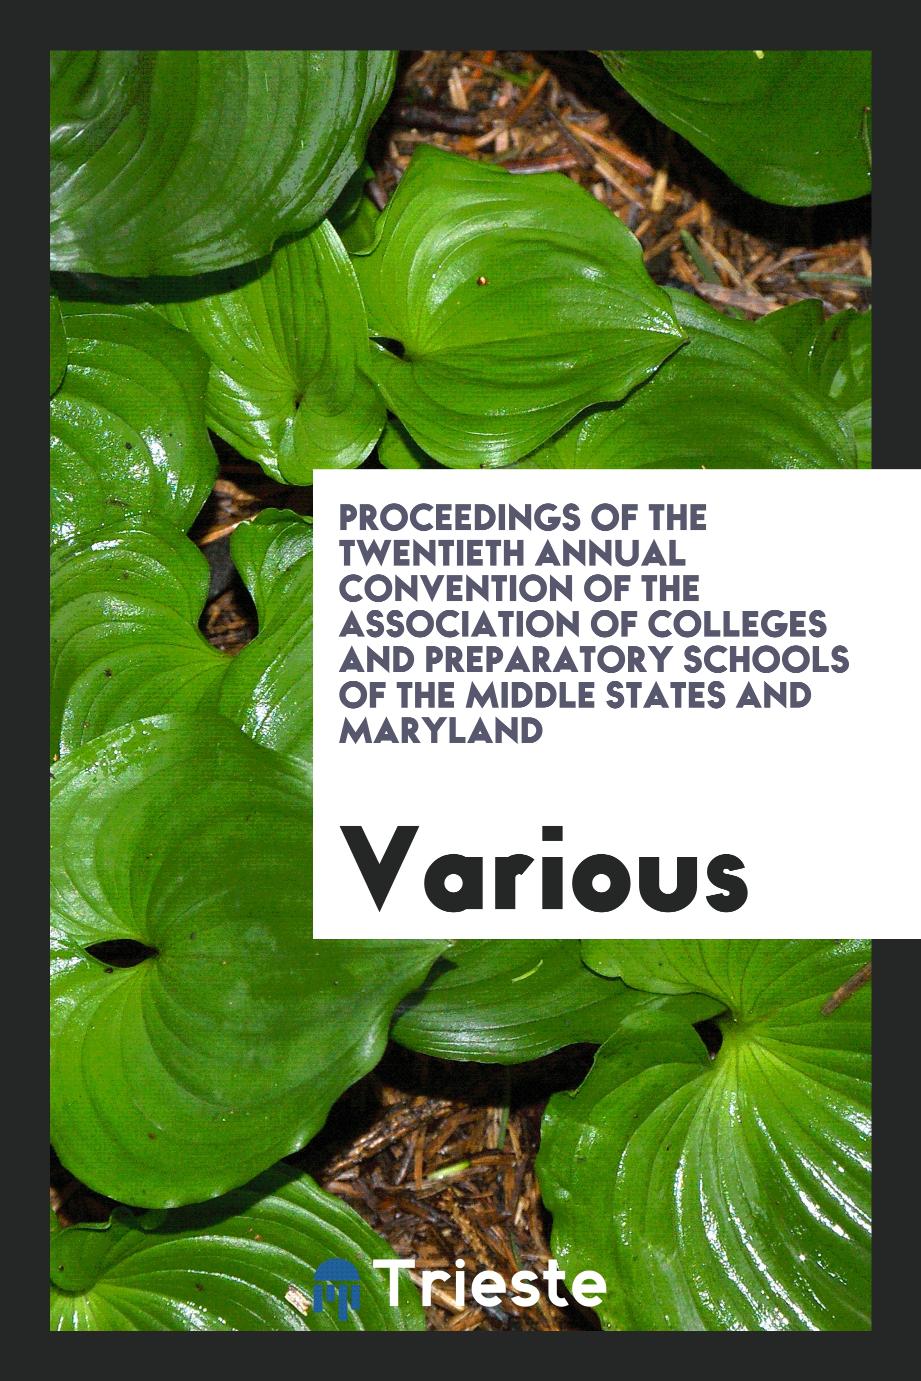 Proceedings of the Twentieth Annual Convention of the Association of Colleges and Preparatory Schools of the Middle States and Maryland